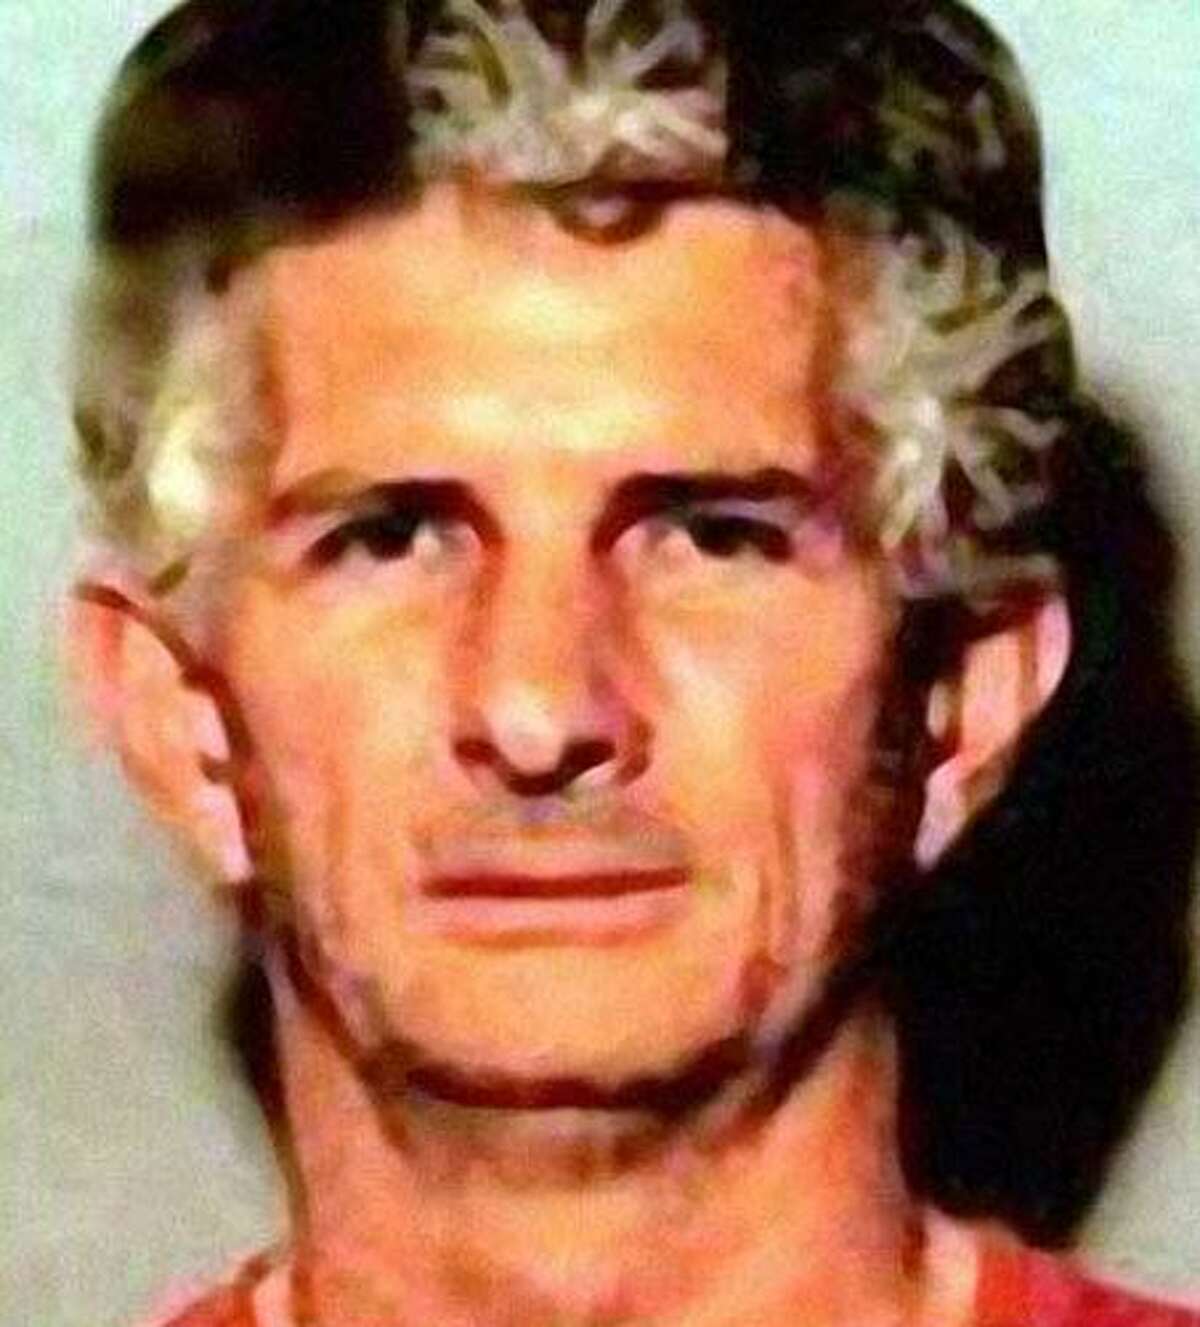 Name: Charles Frederick Albright Alias: The Eyeball KillerCrime: Killed three women in the Dallas area in the early '90s. Investigators noted each victim had their eyeballs surgically removed.Status: In 1994, Albright was convicted and sentenced to life in prison. He is incarcerated at Clements Unit in Amarillo, Texas.